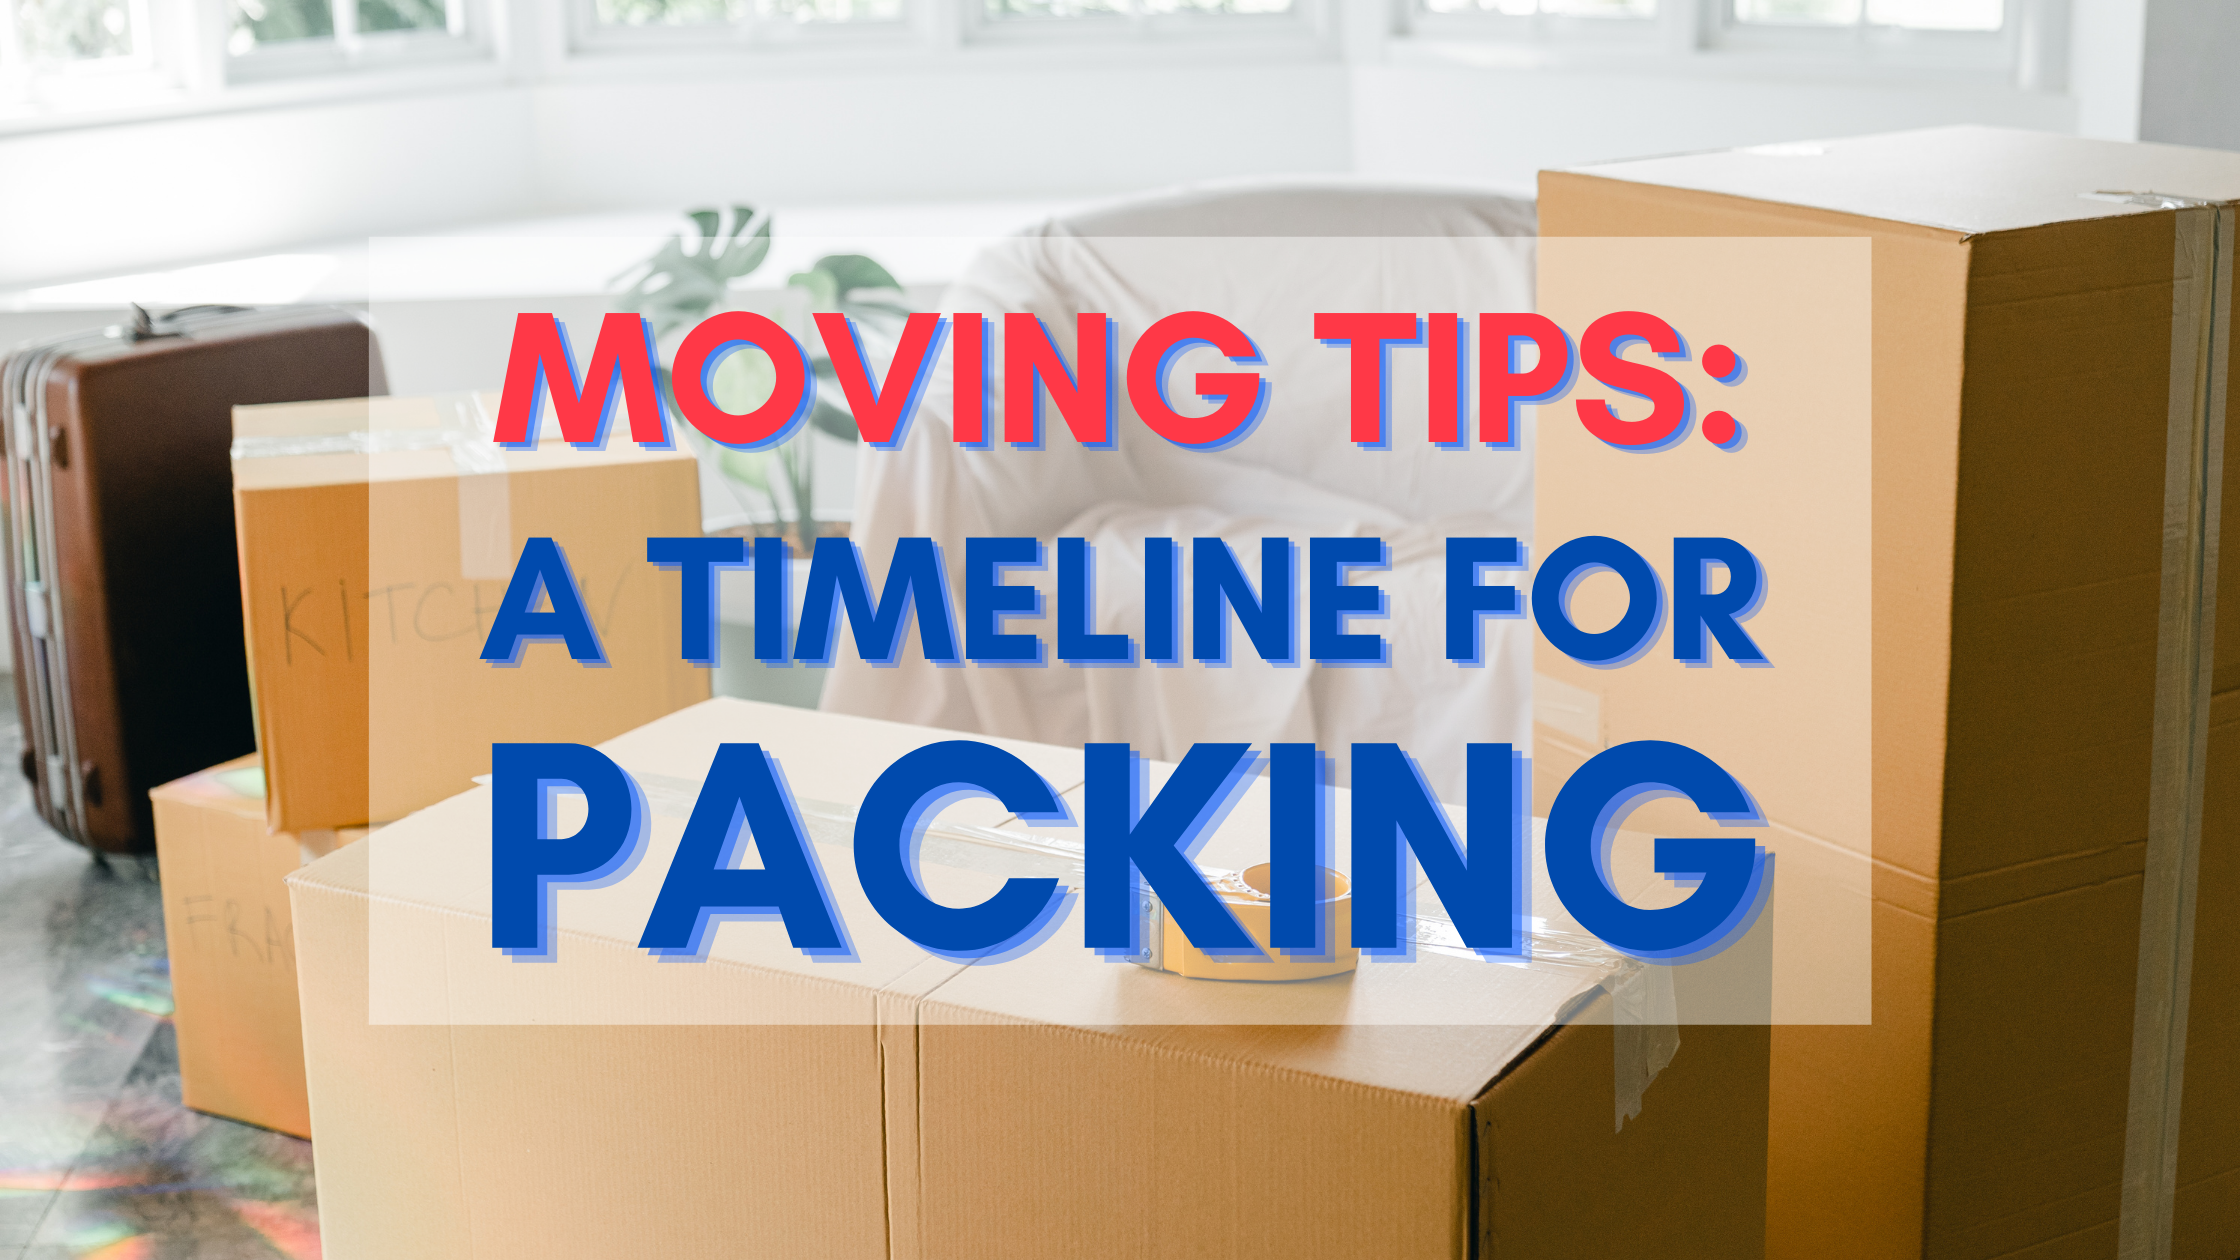 Moving Tips: A Timeline for Packing